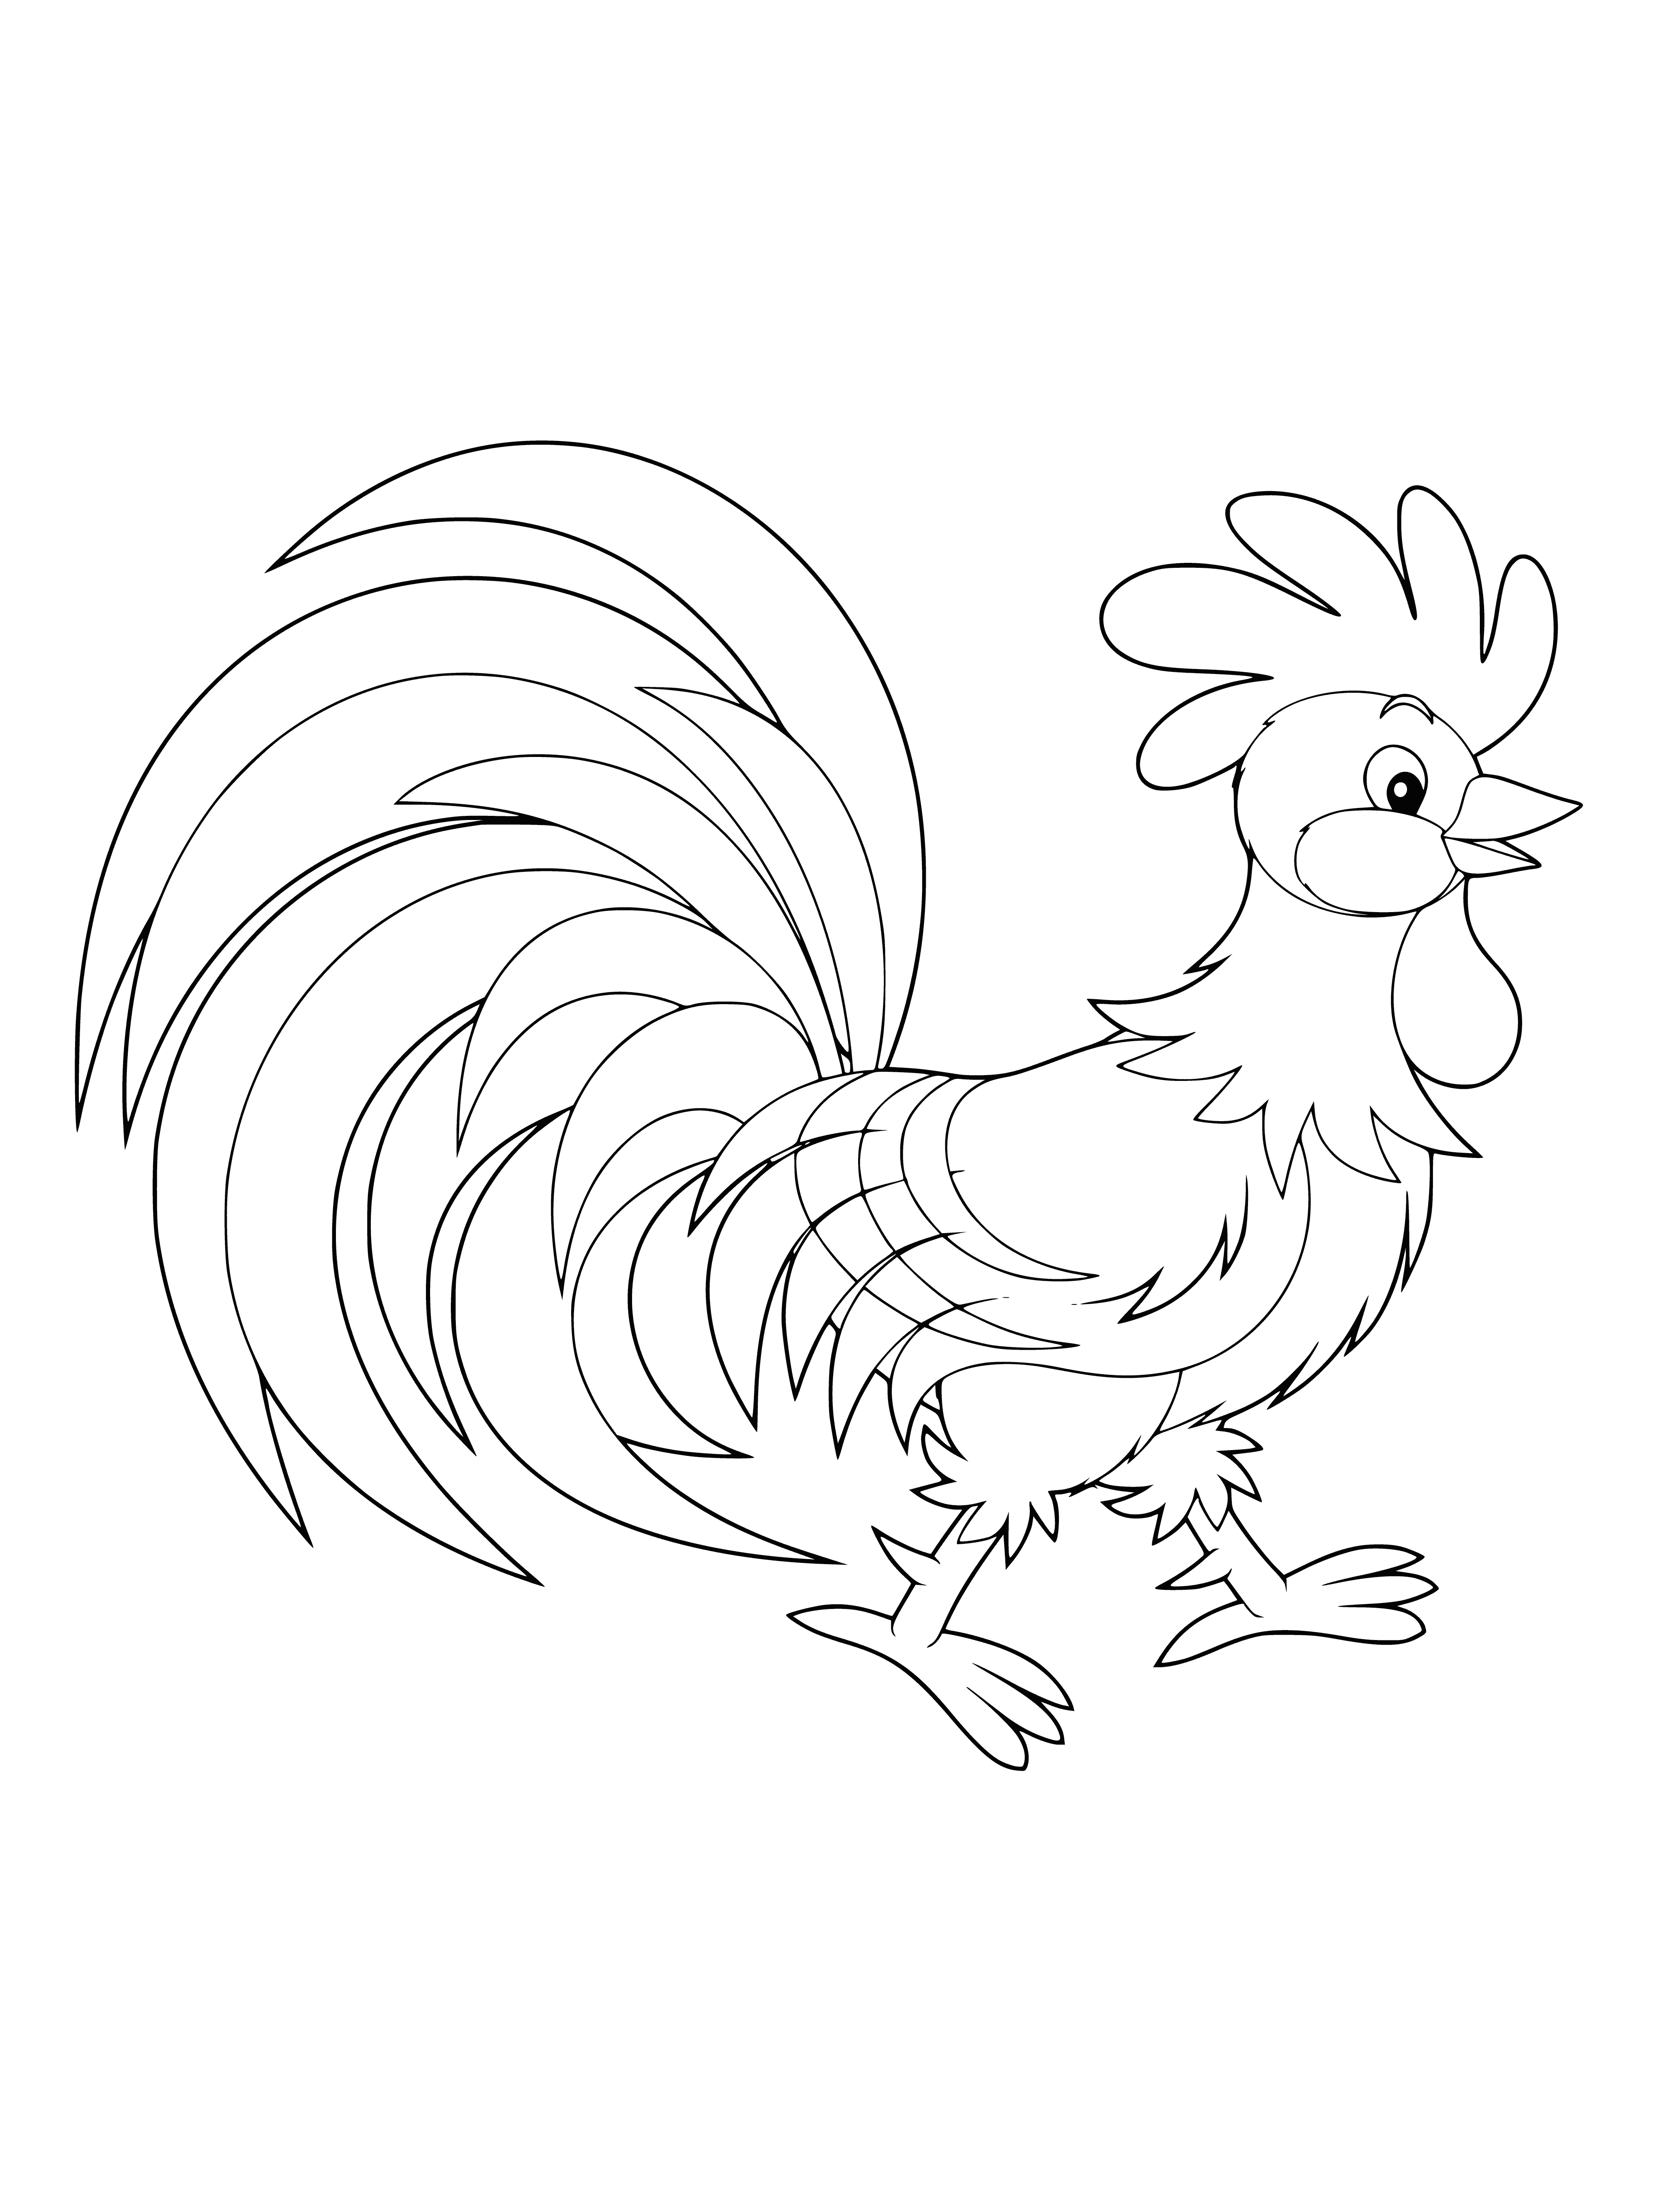 coloring page: A rooster with a red comb stands on a fence, looking left. Brown and white tail, one leg up.